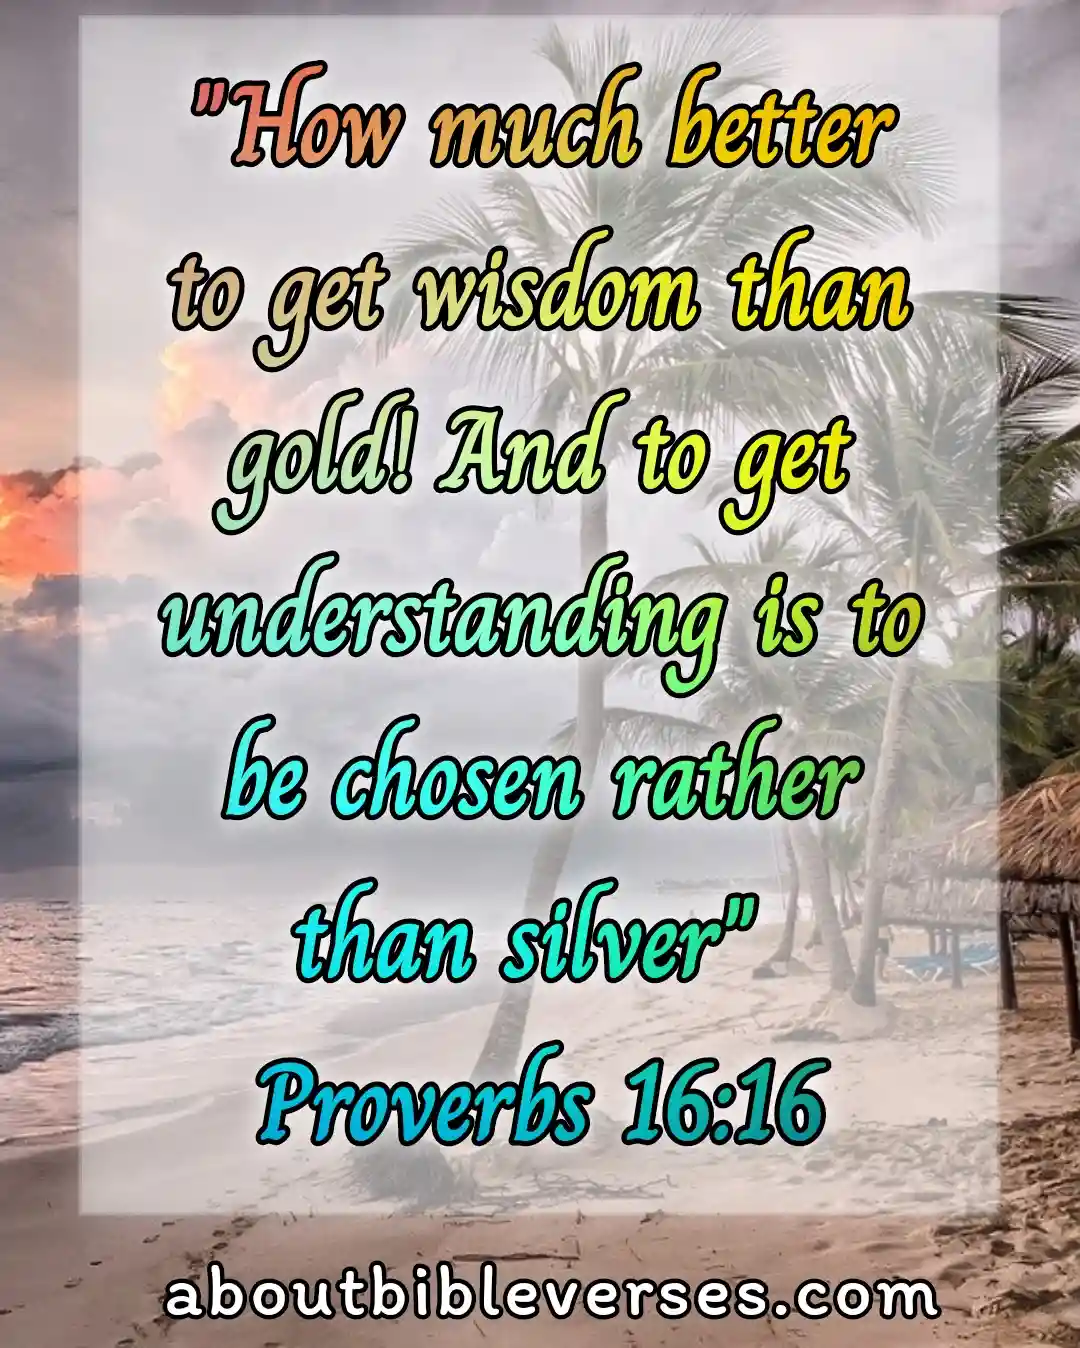 bible verses about wisdom (Proverbs 16:16)